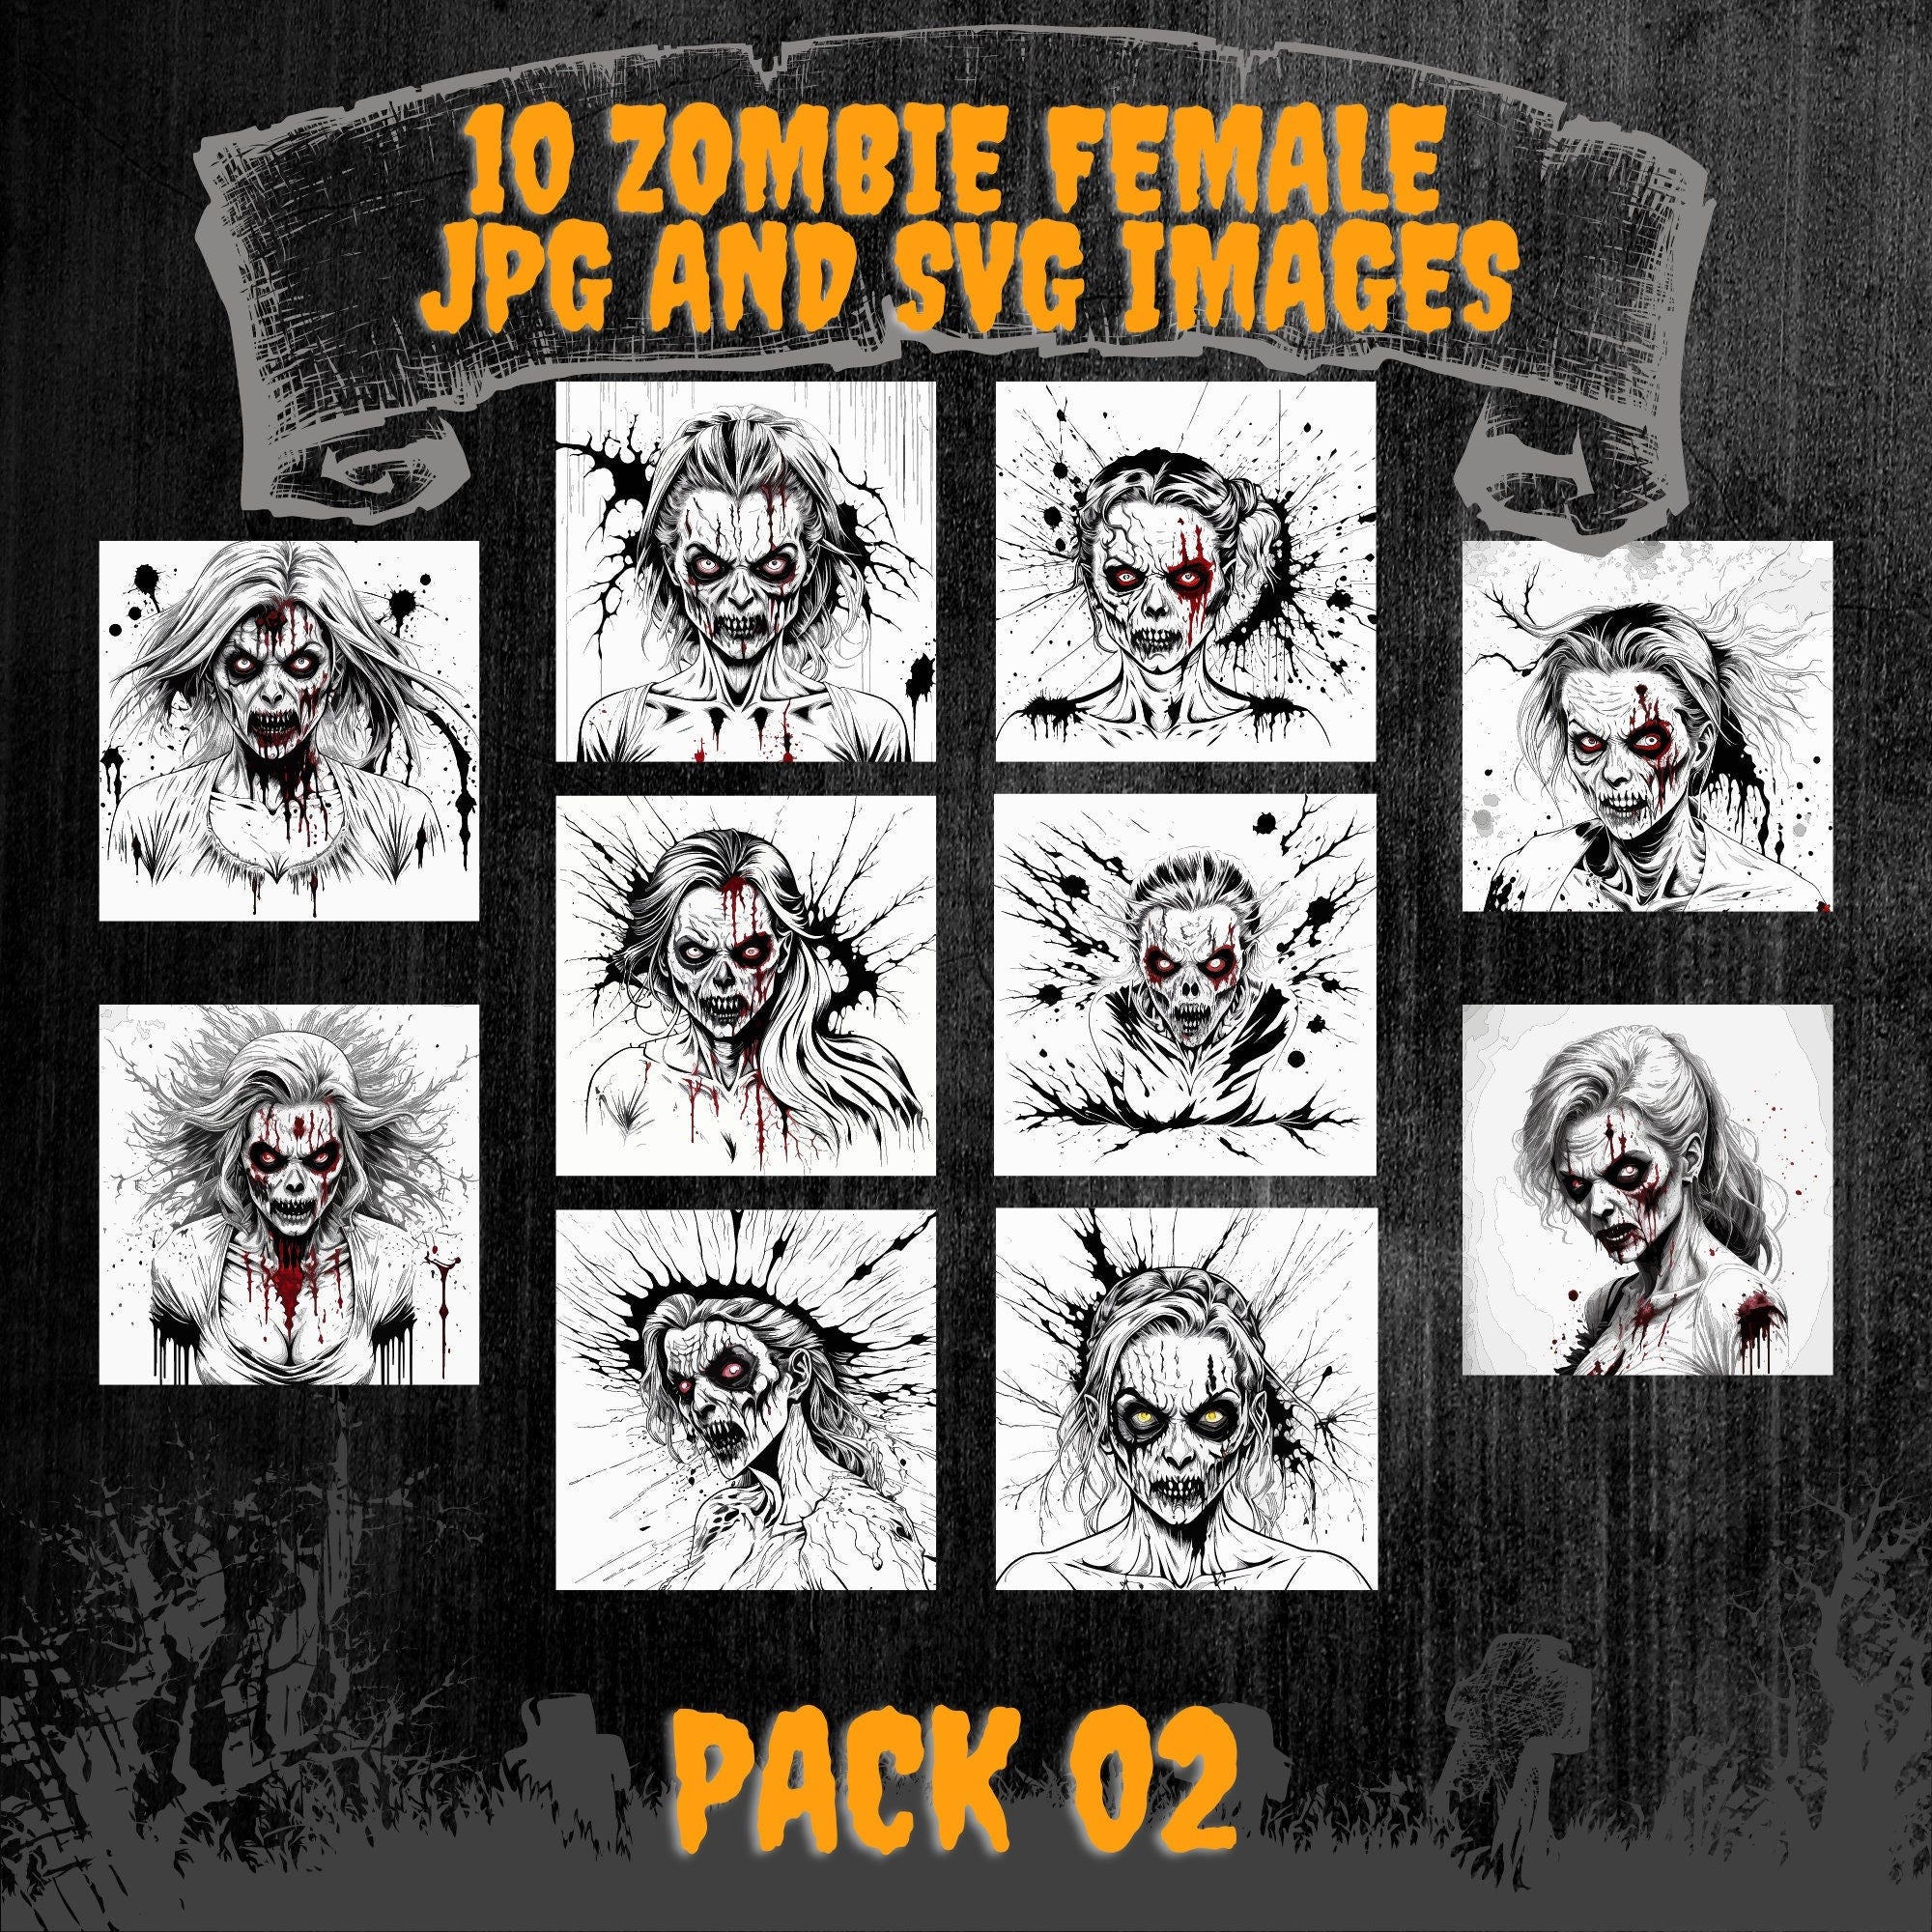 Creepy and Chic: 10 Female Zombie JPG and SVG Digital Files for Your Spooky, Horror Designs - Commercial and Personal Use! - Pack 02!